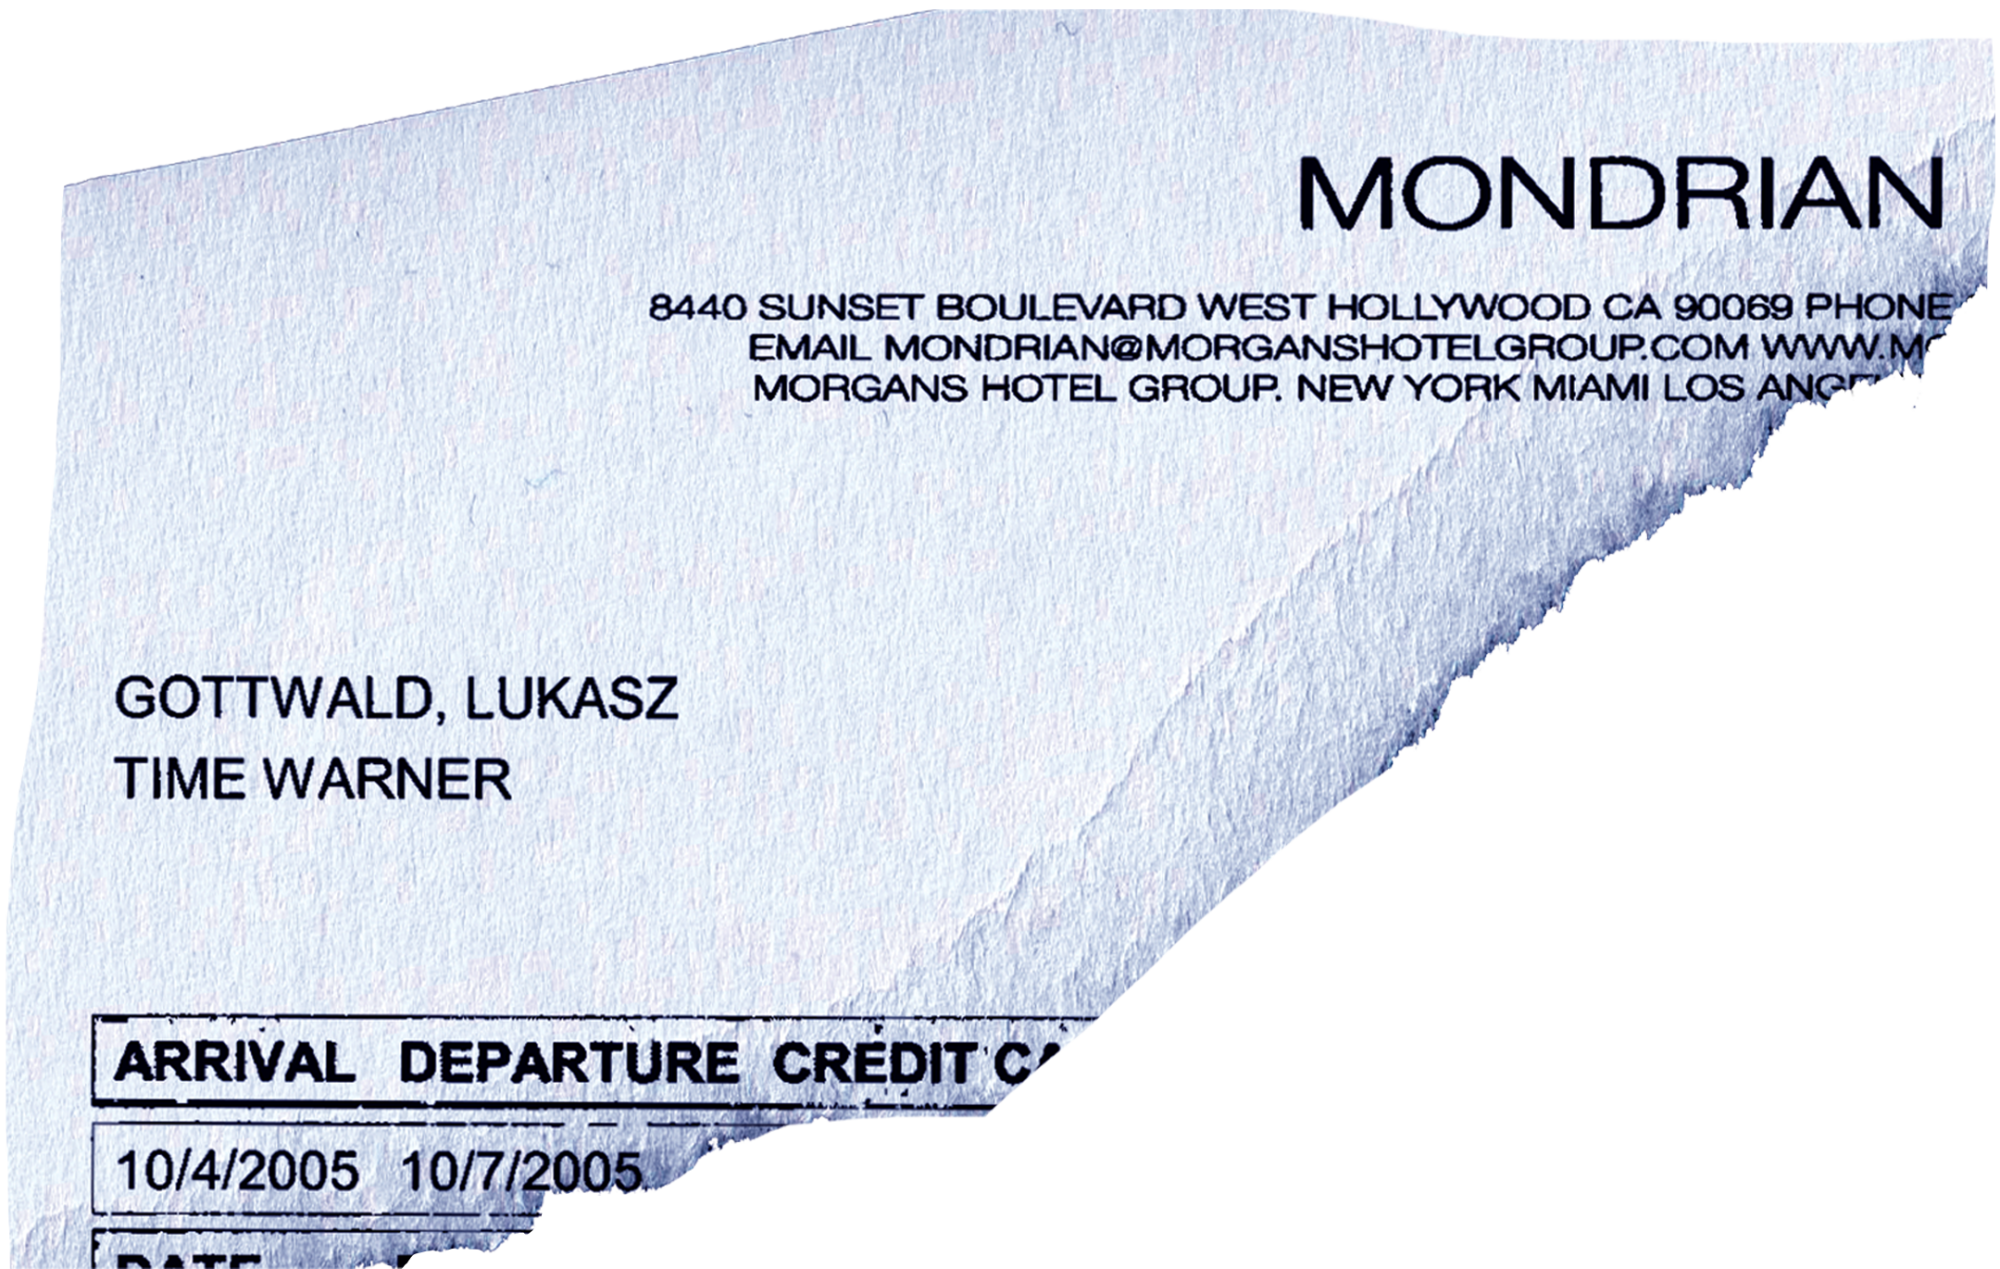 Fragment of a Mondrian Hotel receipt shows "Gottwald, Lukasz" with arrival date of 10/4/2005 and departure 10/7/2005